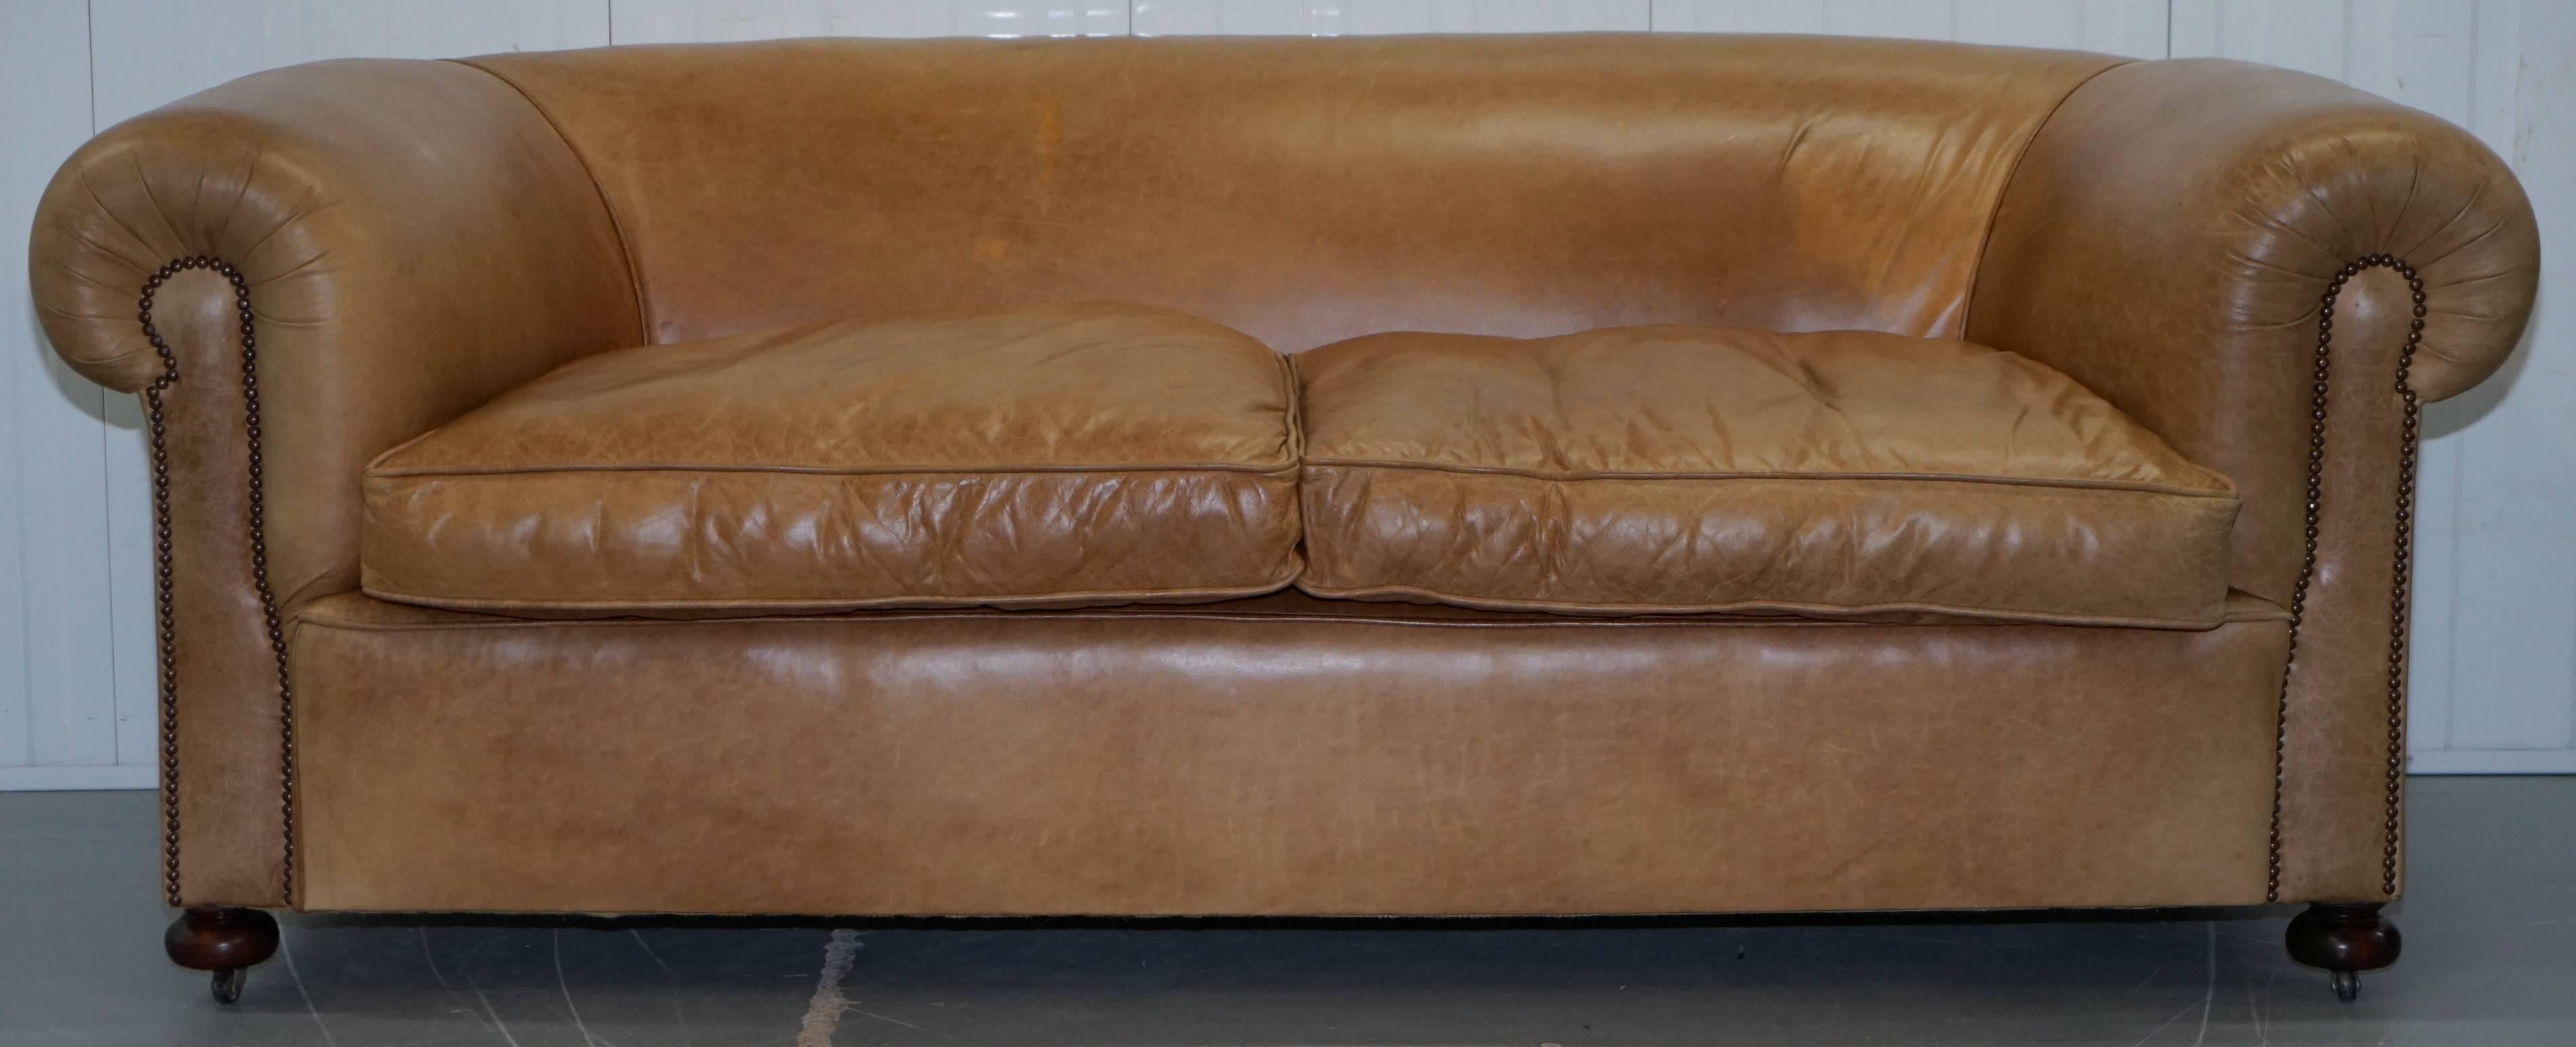 We are delighted to offer for sale 1 of 2 lovely restored vintage Victorian club sofas 

This auction is for the second sofa which was made to match the original Victorian one in or around the 1930’s, this original sofa looks pretty much identical